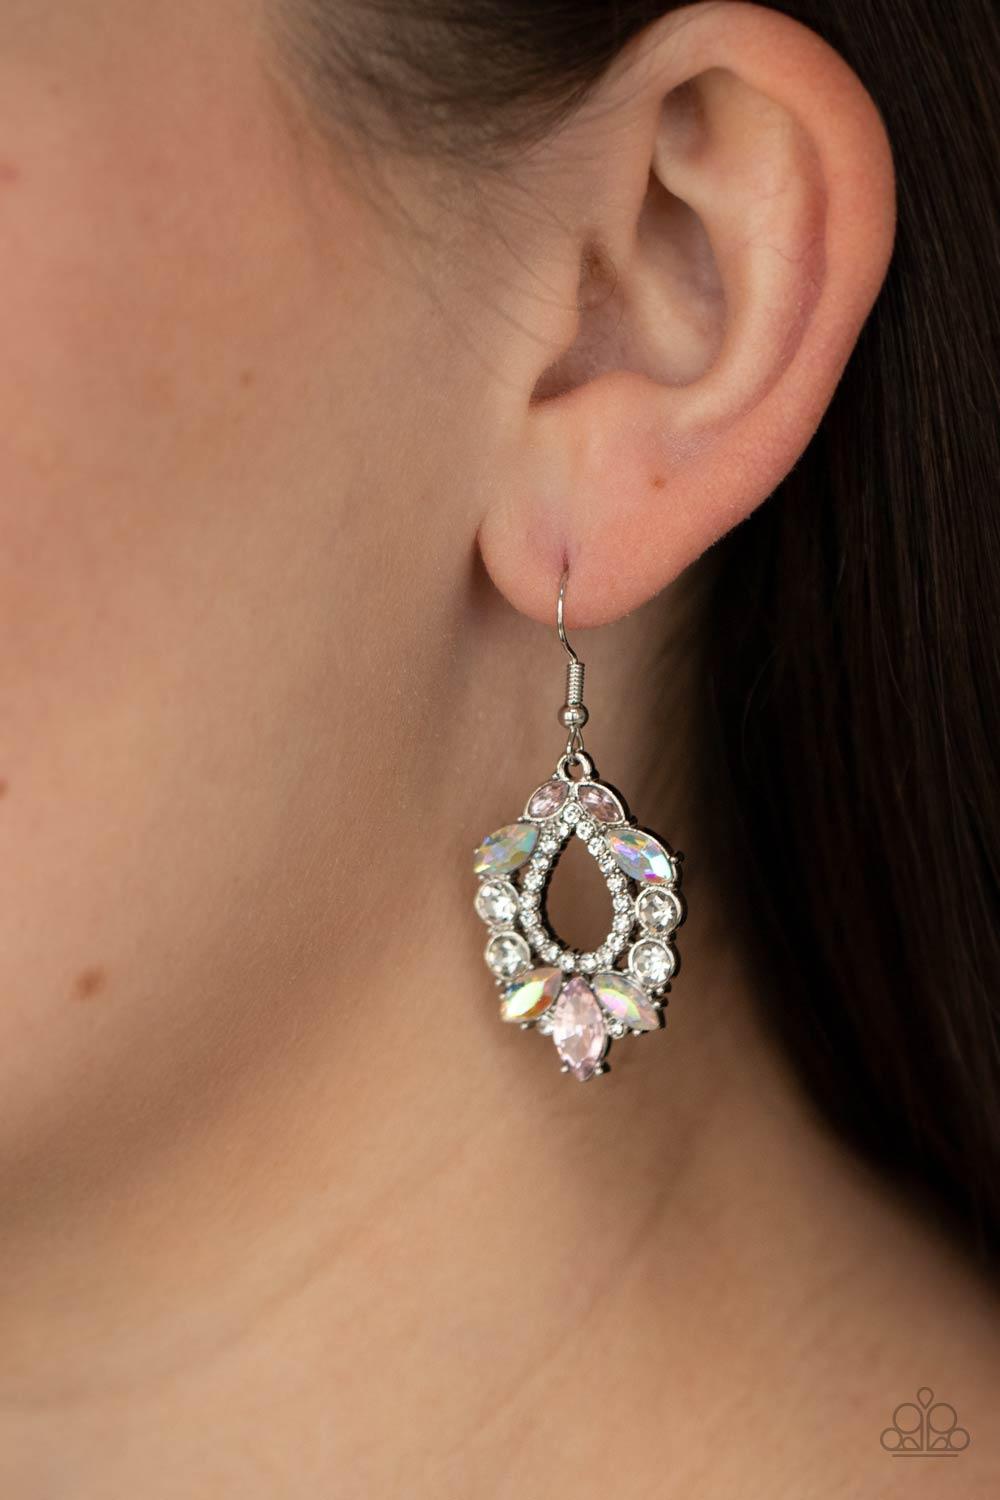 Paparazzi Accessories New Age Noble - Multi Featuring regal marquise and classic round cuts, a glittery collection of pink, white, and iridescent rhinestones coalesce into a jaw-dropping teardrop frame. Earring attaches to a standard fishhook fitting. Sol